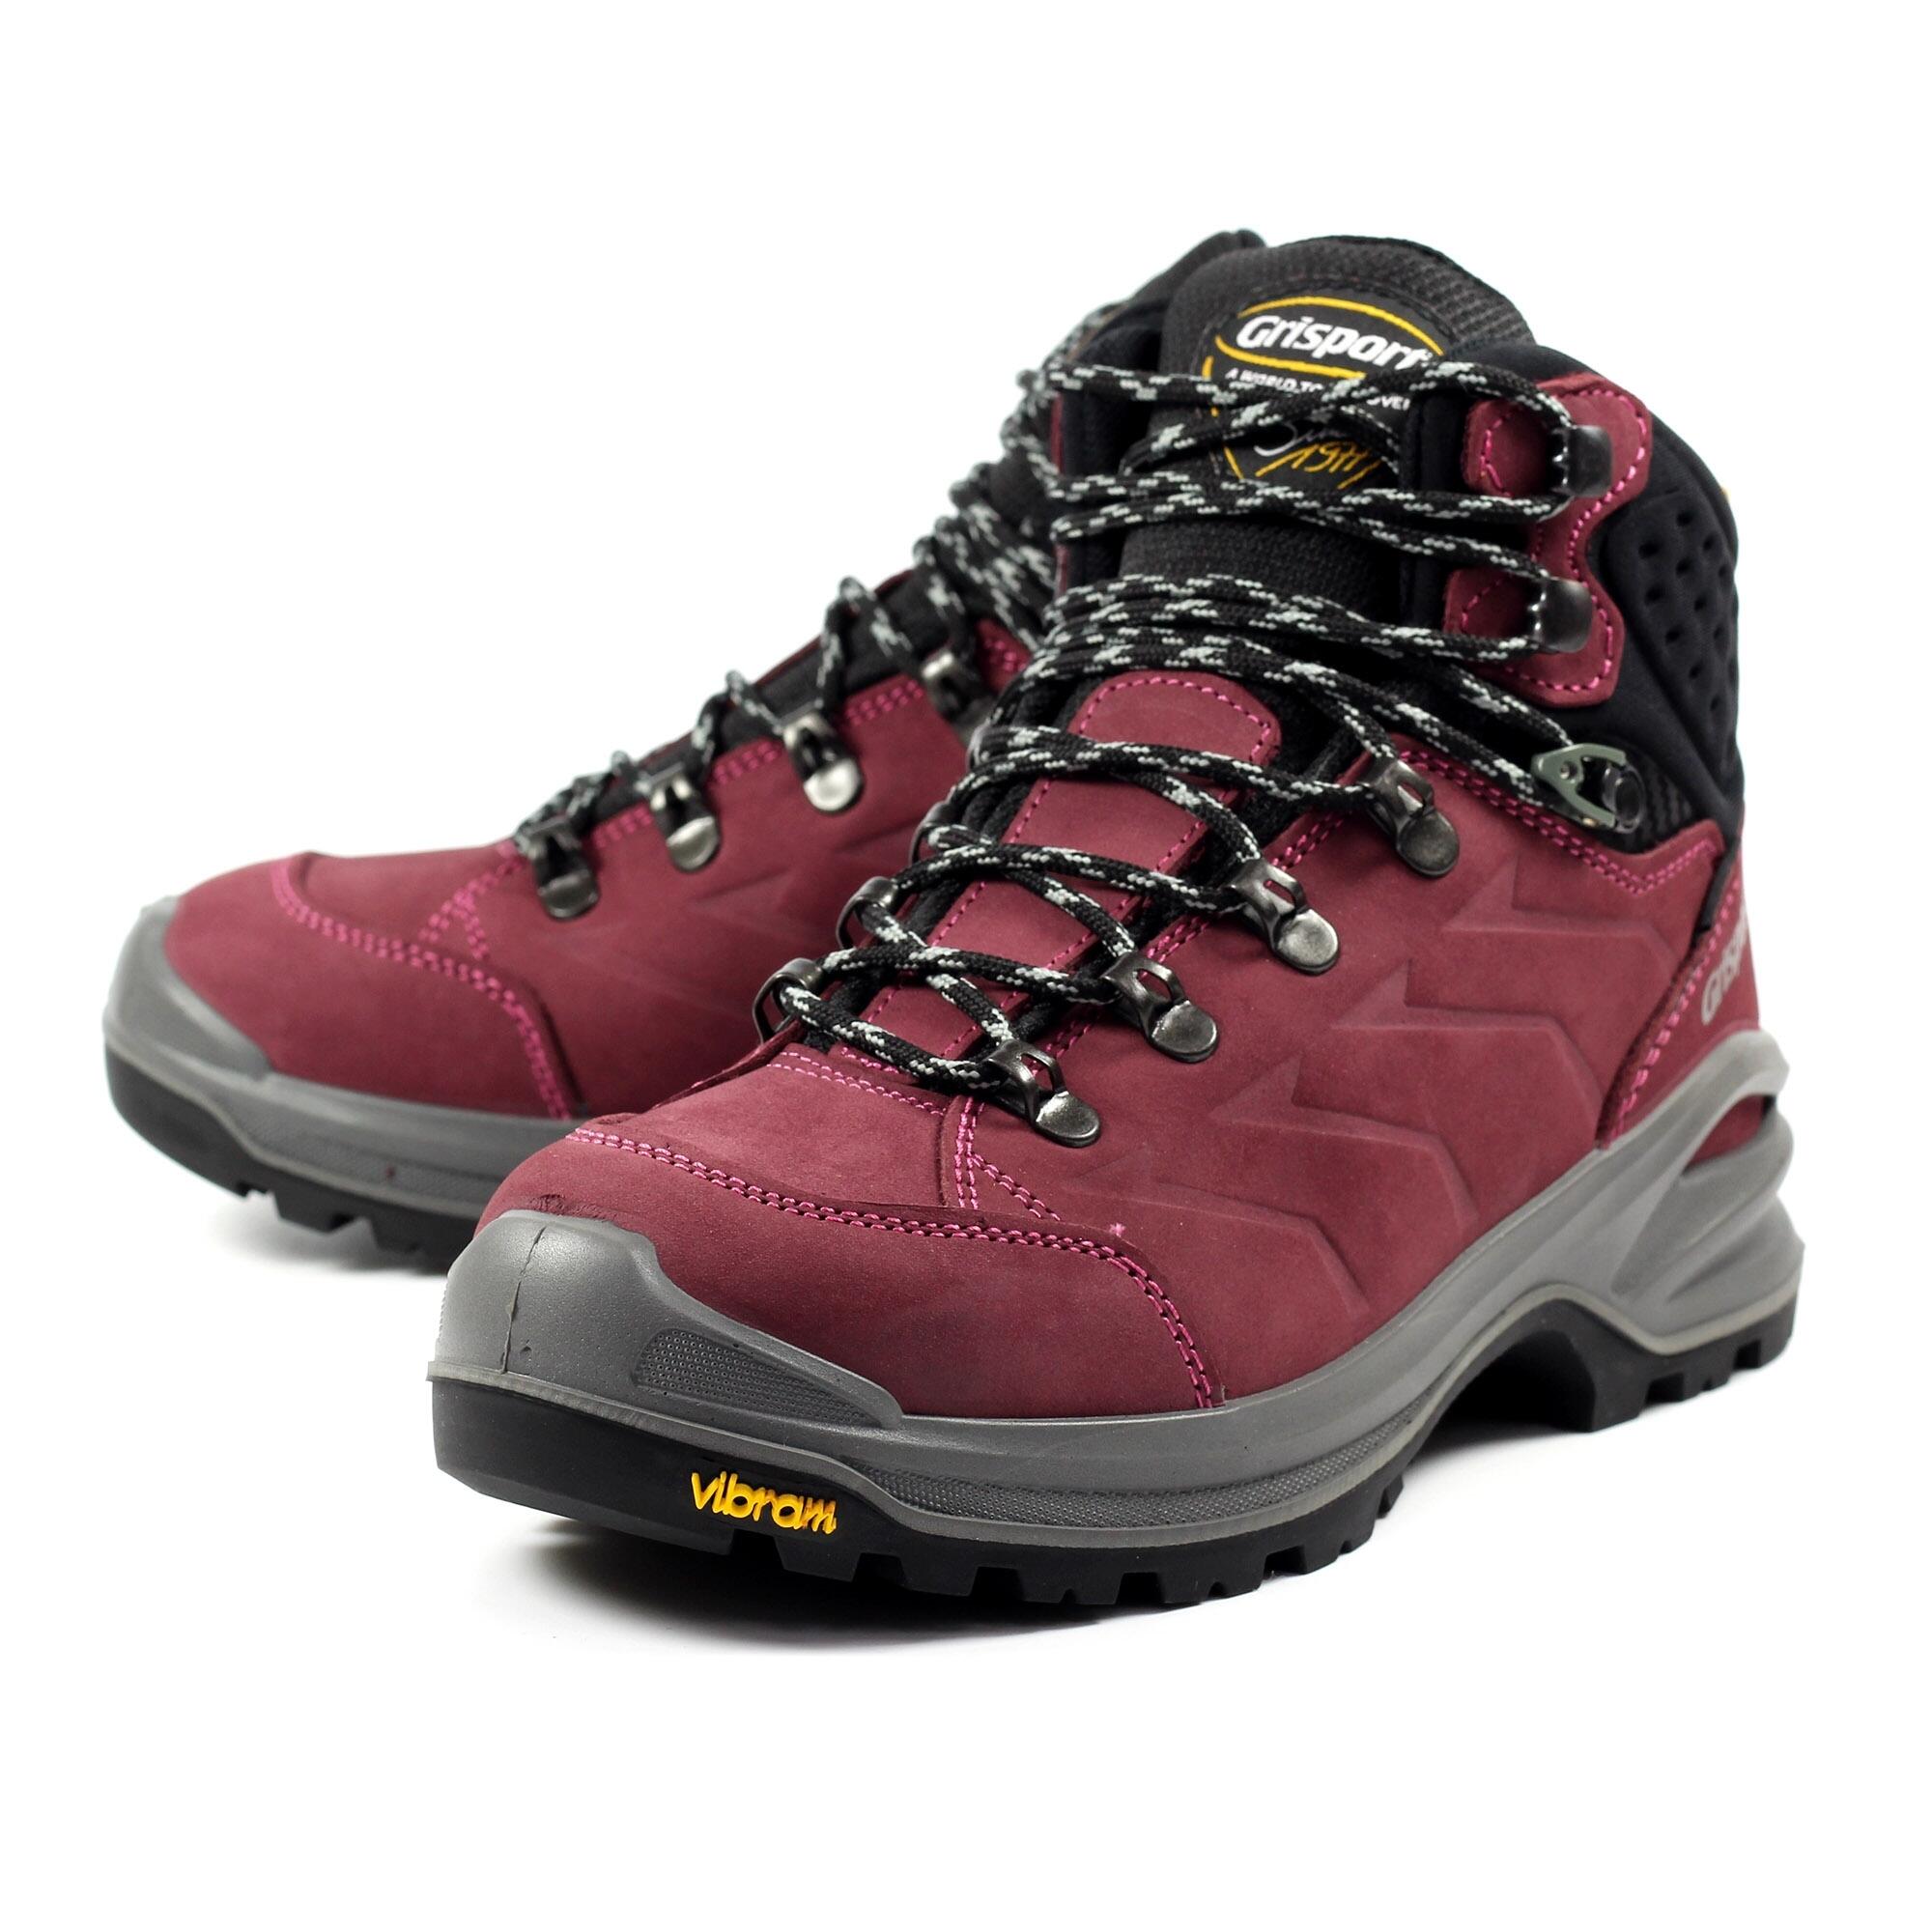 Lady Lynx Padded Ankle Trekking Boot 6/7